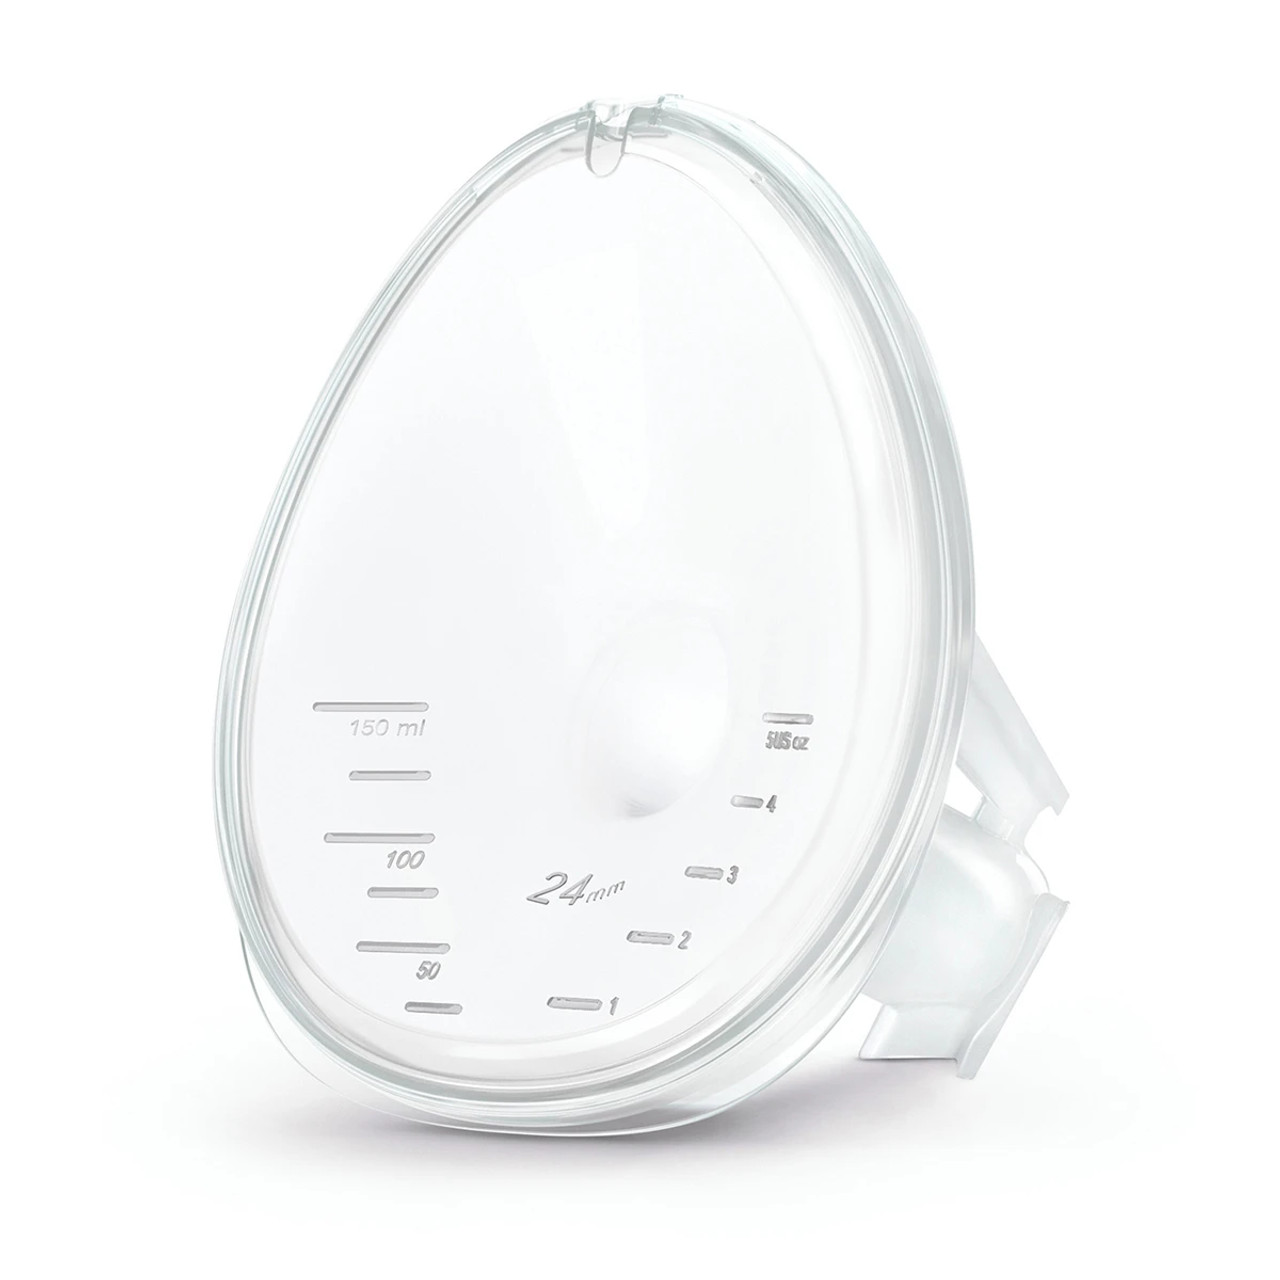 Medela Freestyle Hands-Free Breast Pump - Whole Bubs